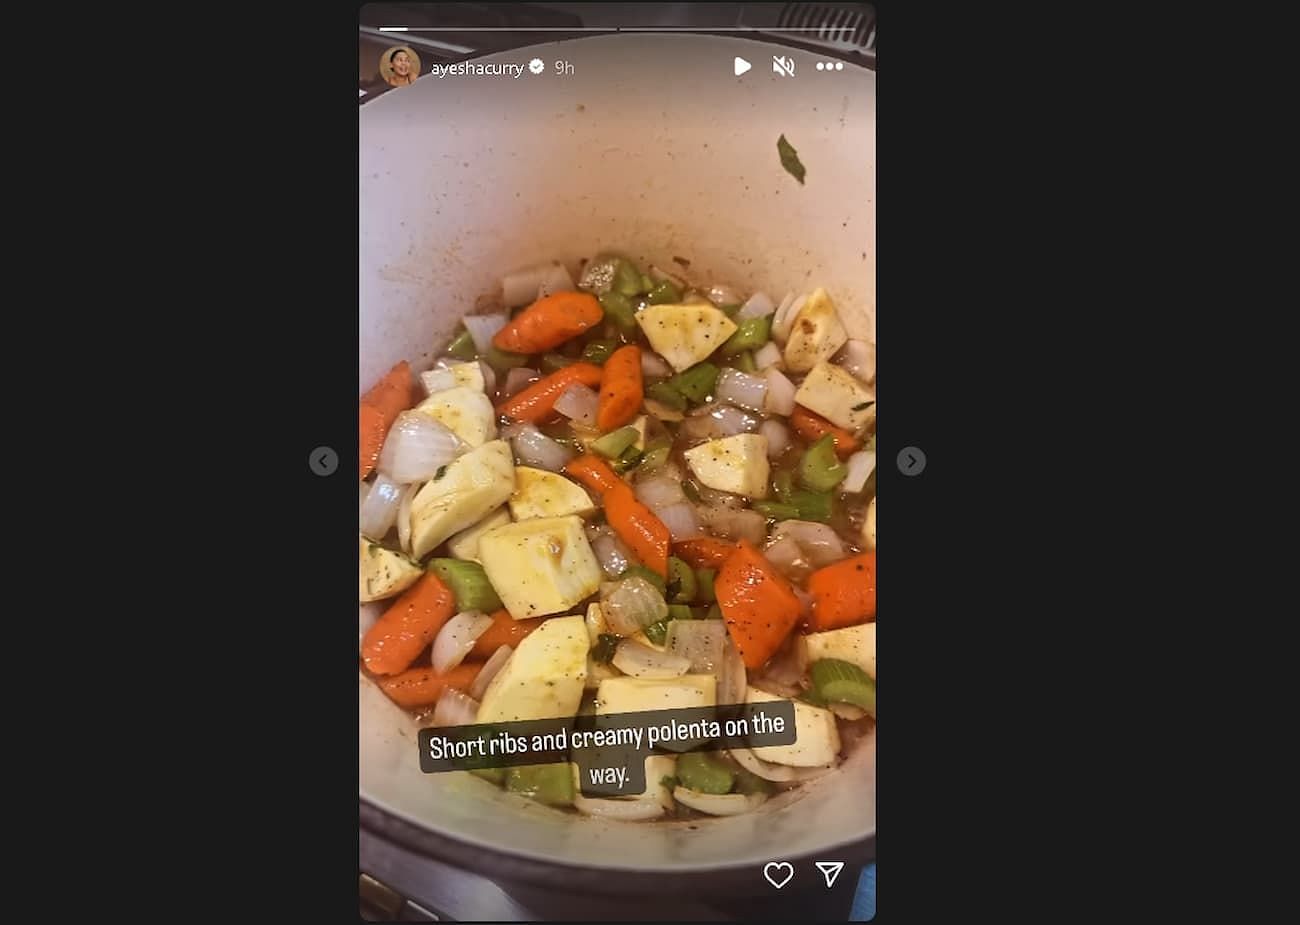 Ayesha Curry posted this video of a meal she is preparing